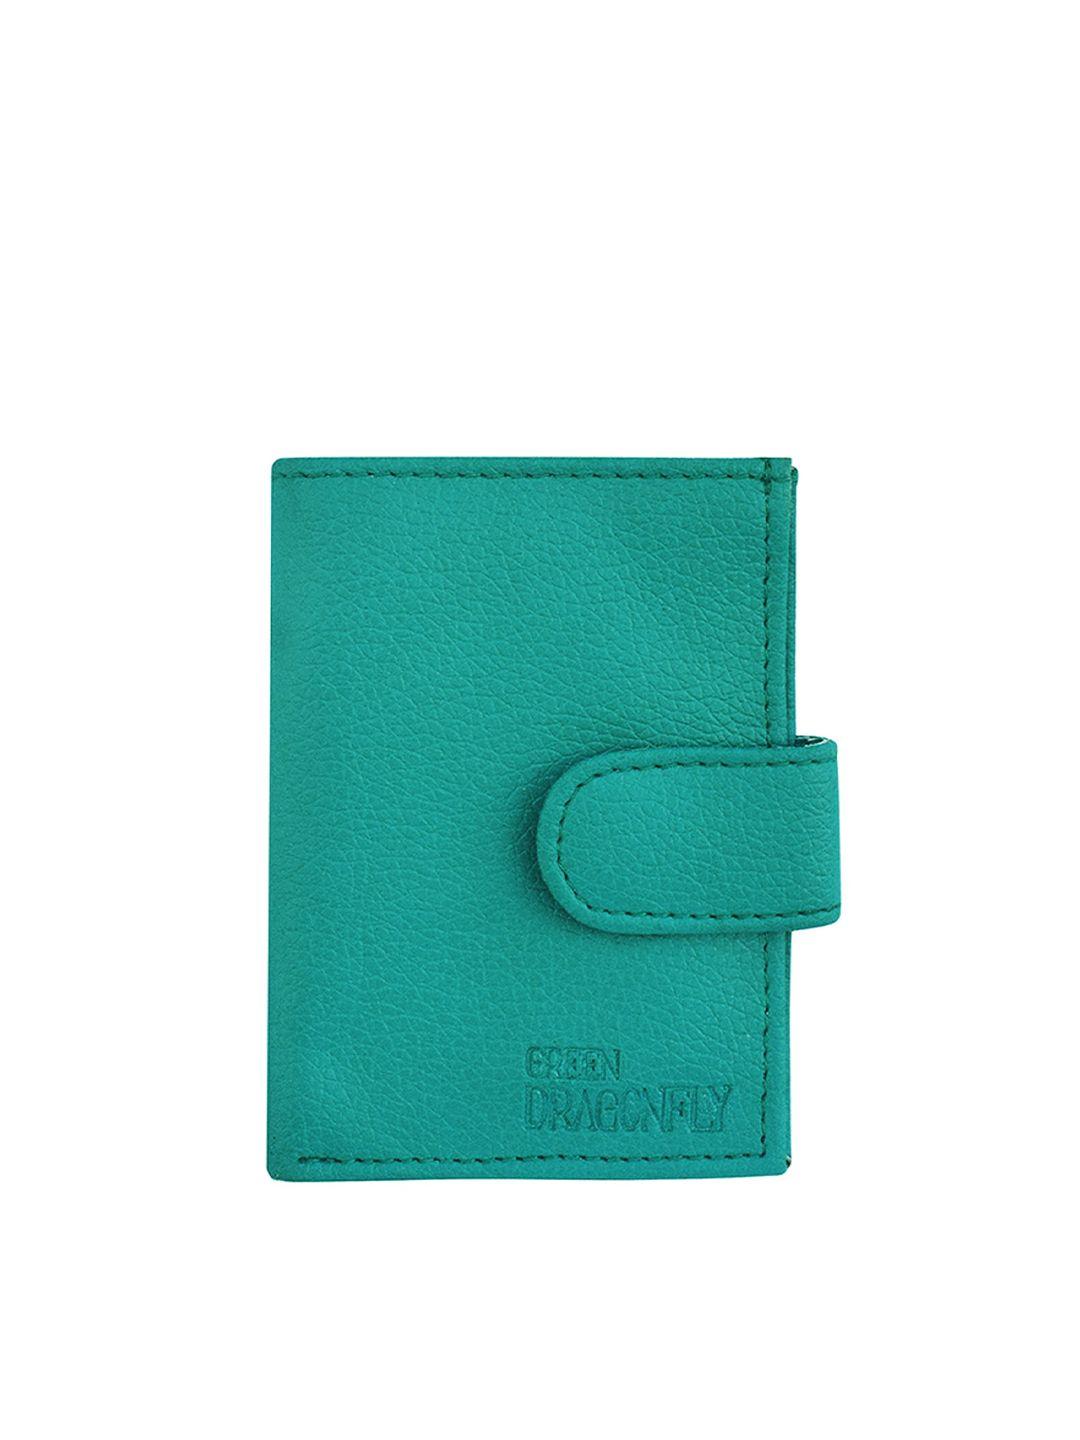 green dragonfly teal textured pu card holder